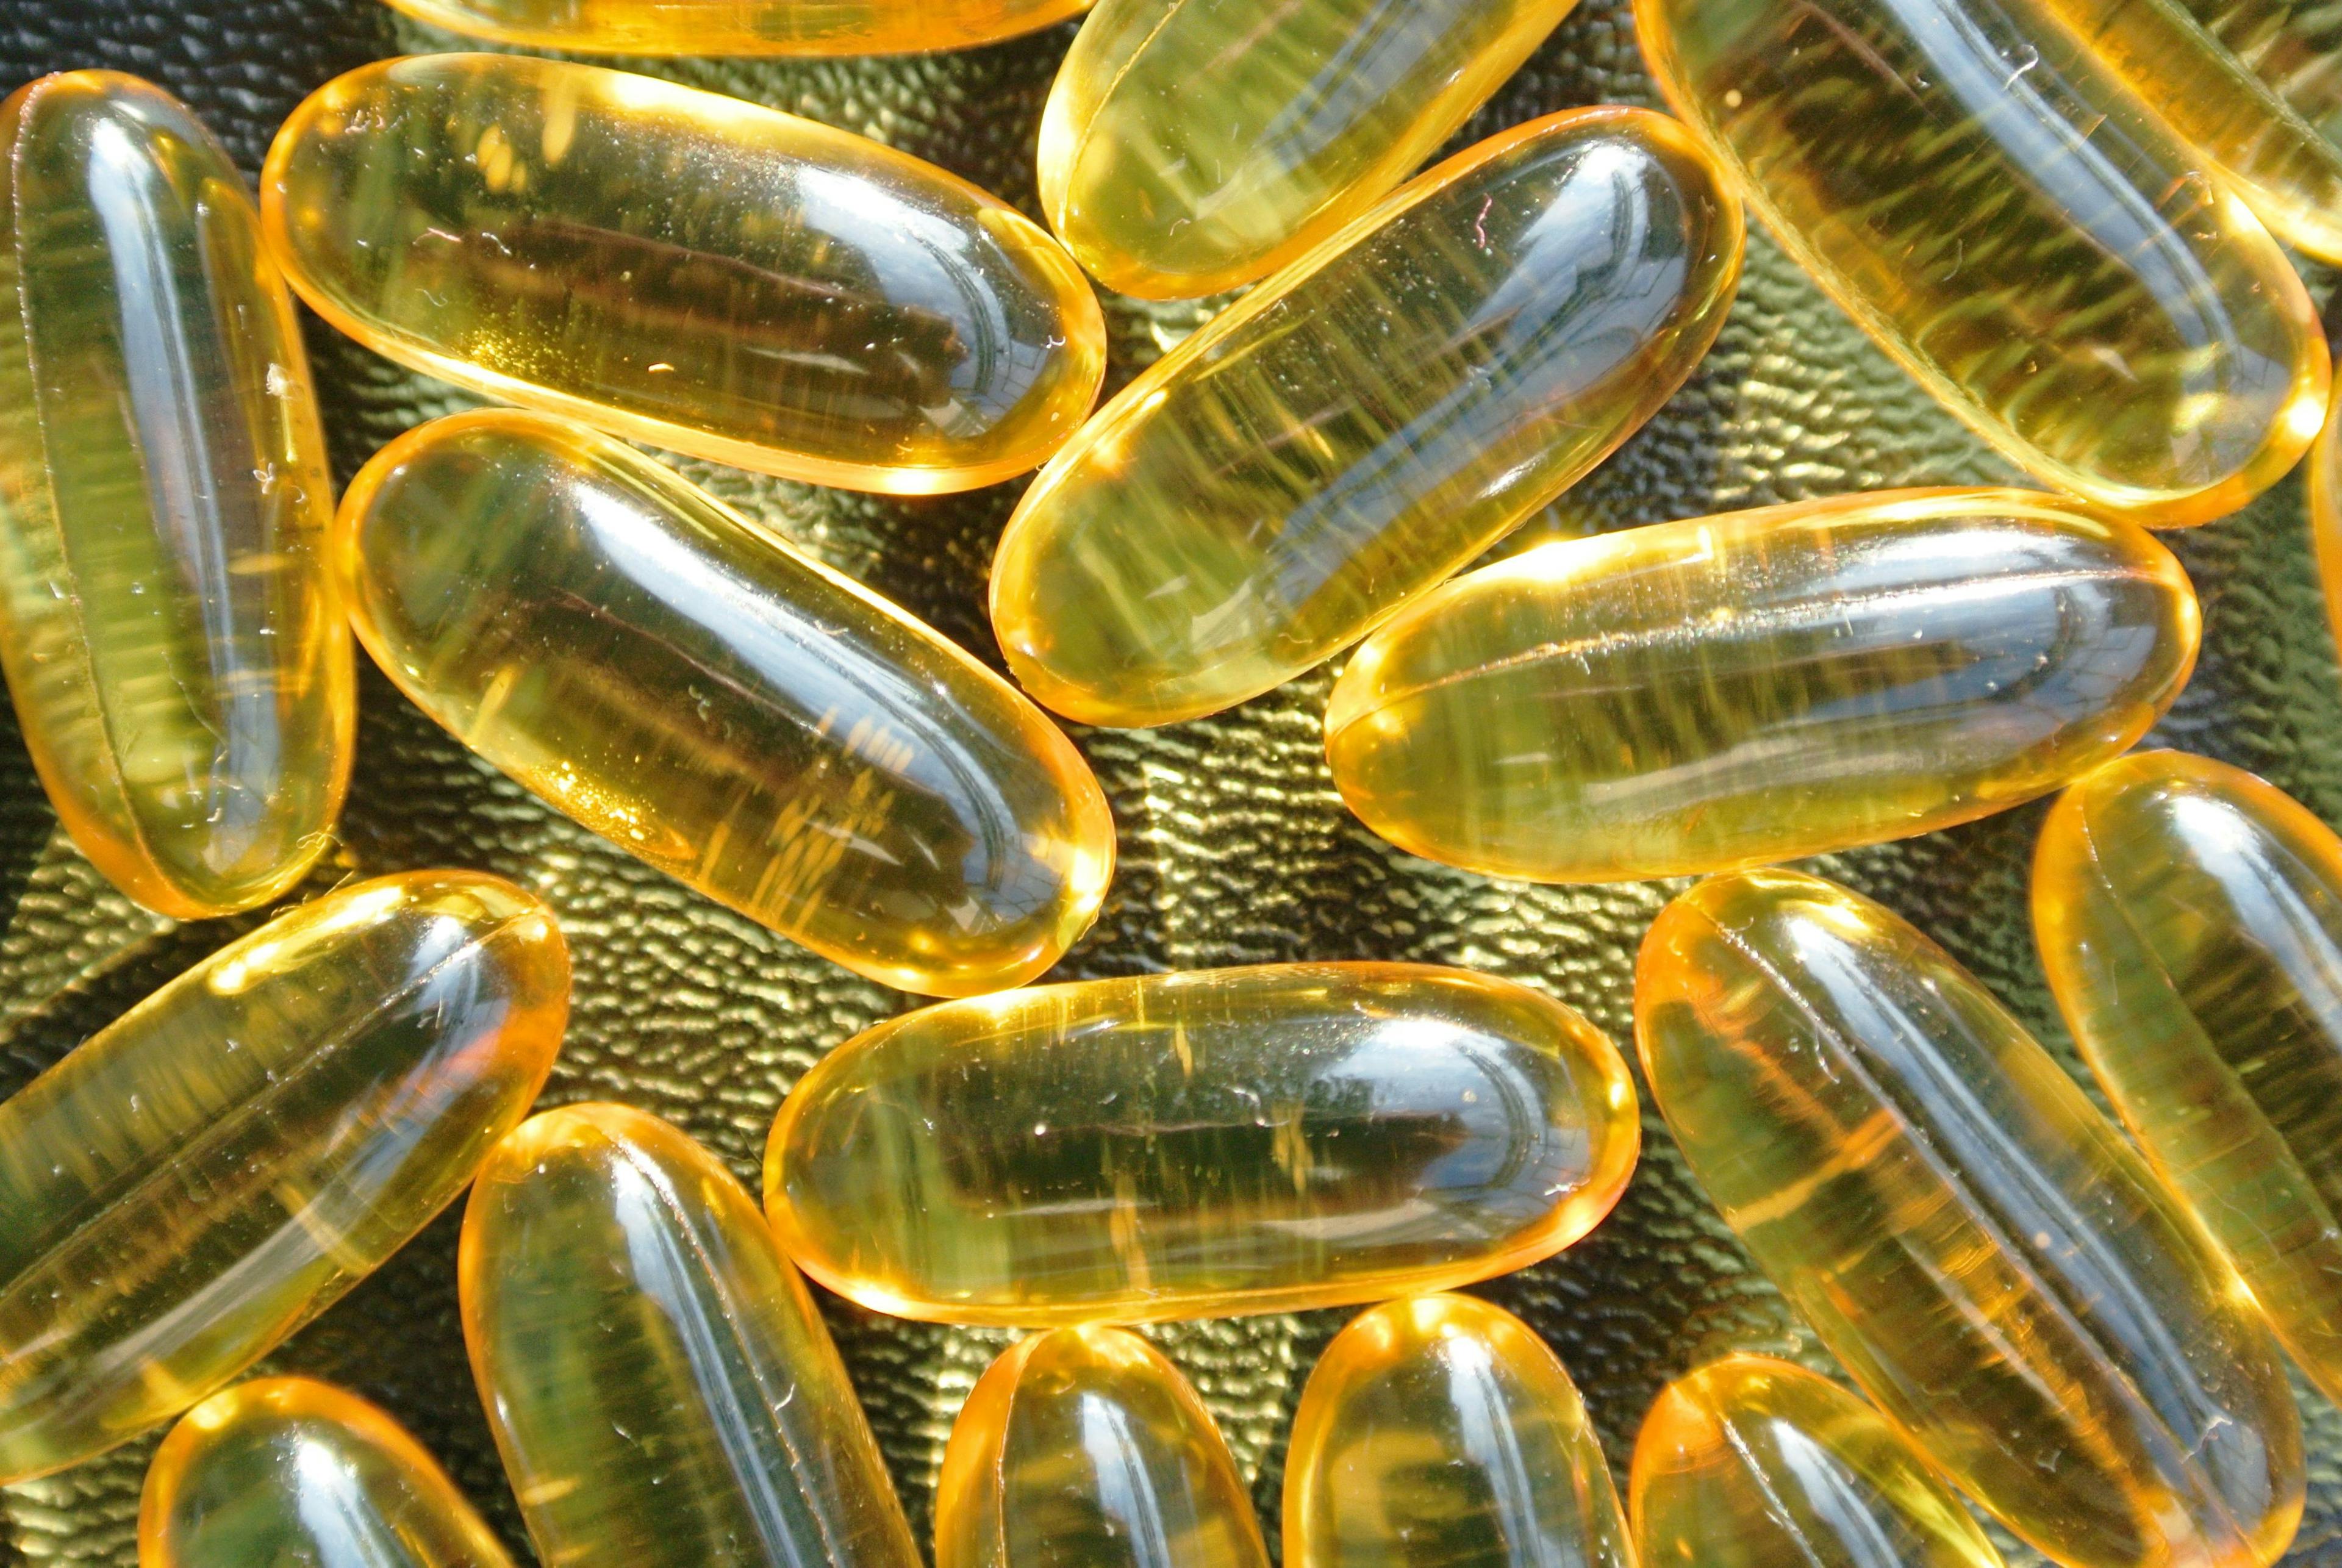 Meta-Analysis Raises Questions Around Risk of Atrial Fibrillation Associated with Omega-3 Supplements